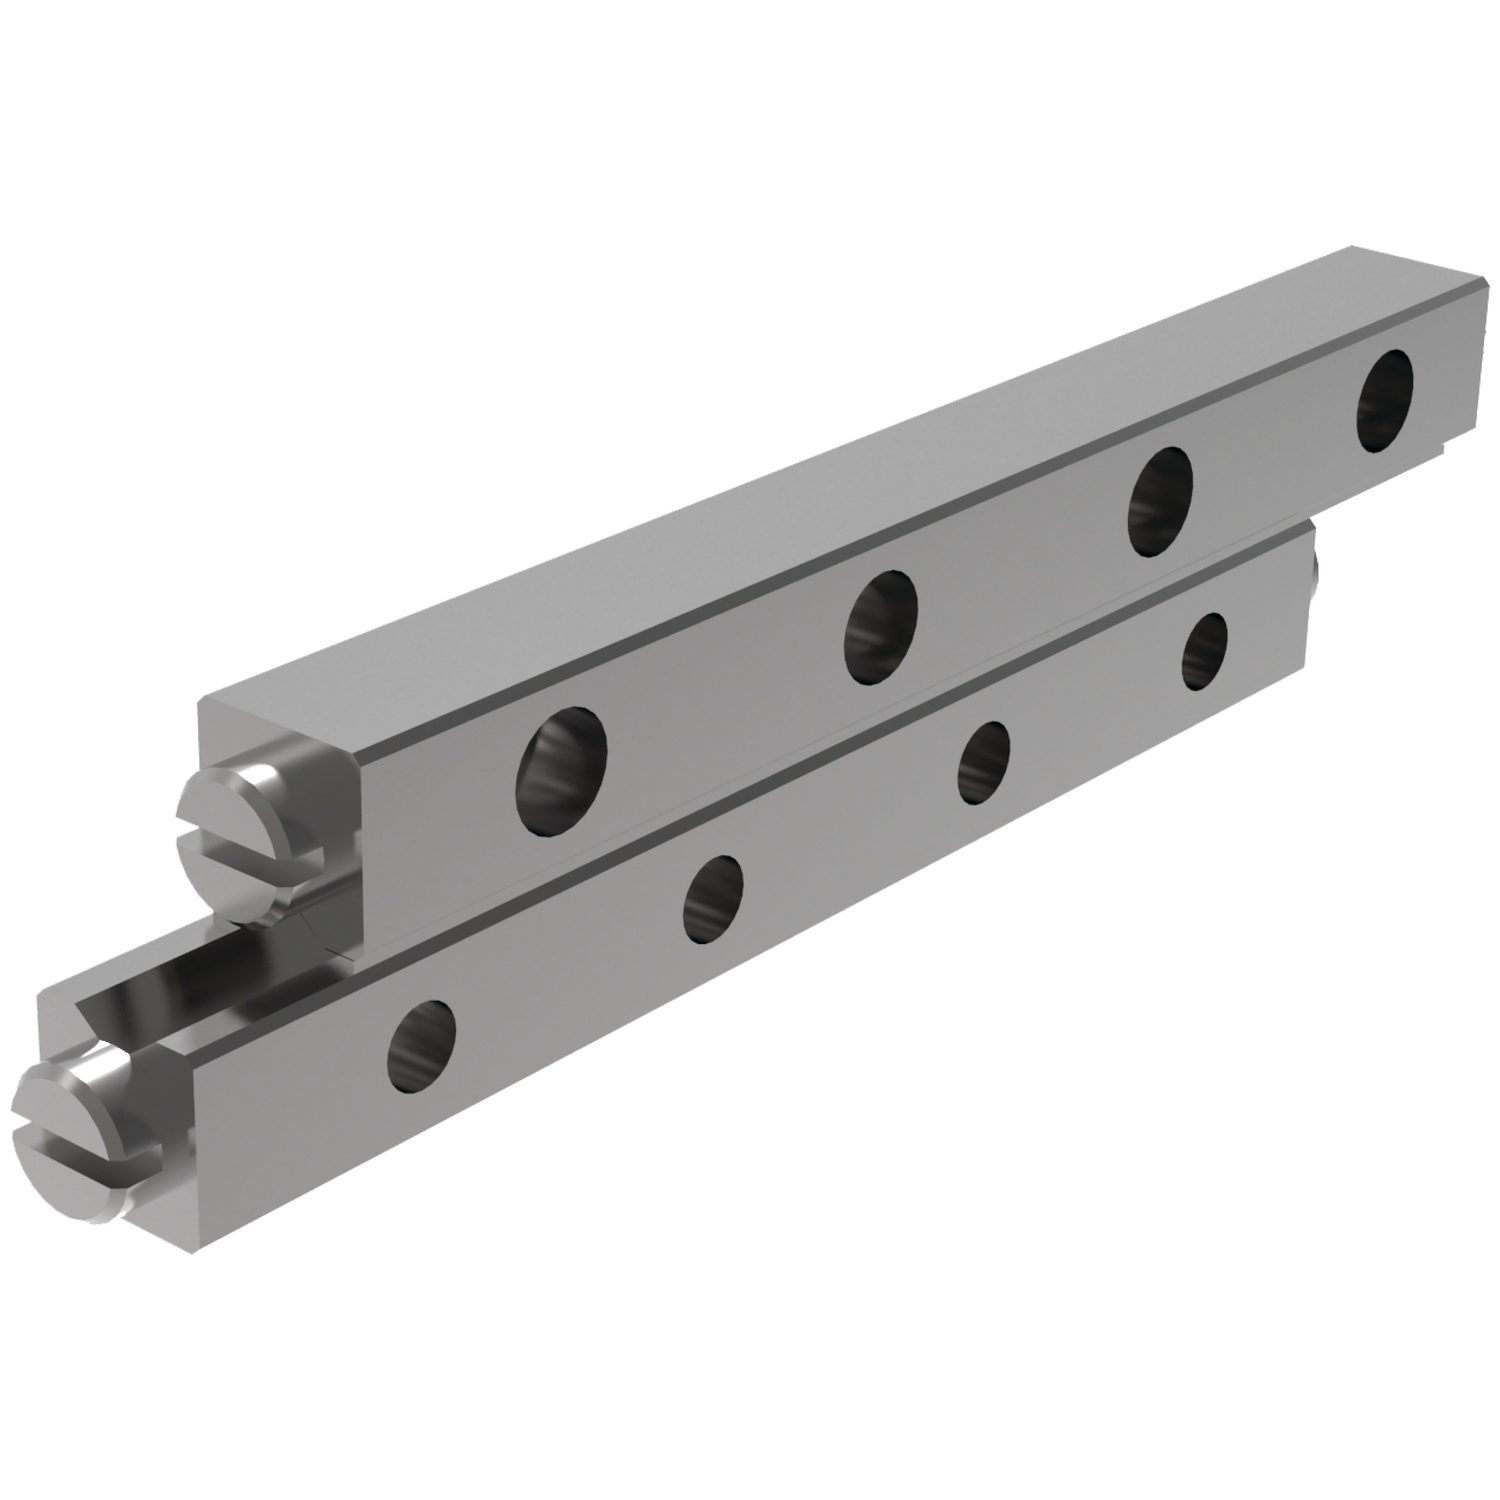 Stainless Crossed Roller Rail Sets This linear rail set has to withstand very heavy loads. Therefore it is made from the extremely strong 440C series stainless steel, hardened to HRc 60±2. Nickel plated for extra resistance to corrosion. See more crossed roller rail sets here.